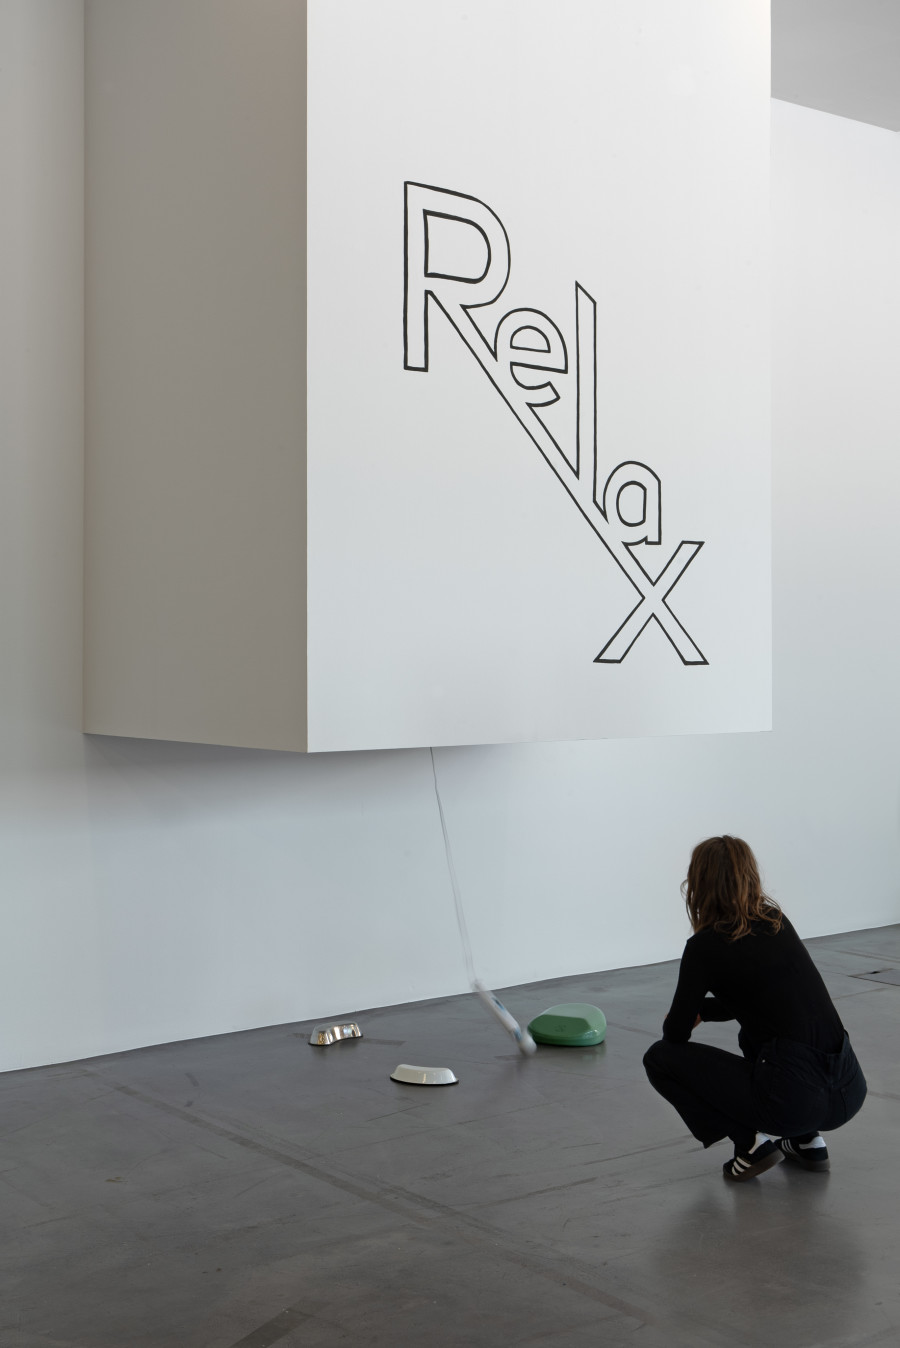 Exhibition viewInterdependencies: Perspectives on Care and Resilience, Ezra Benus, Relax (erotic hypnosis), 2023, Bed pans, Magic Wall, ‹Relax› painted on wood. Courtesy the artist. Photo: Studio Stucky